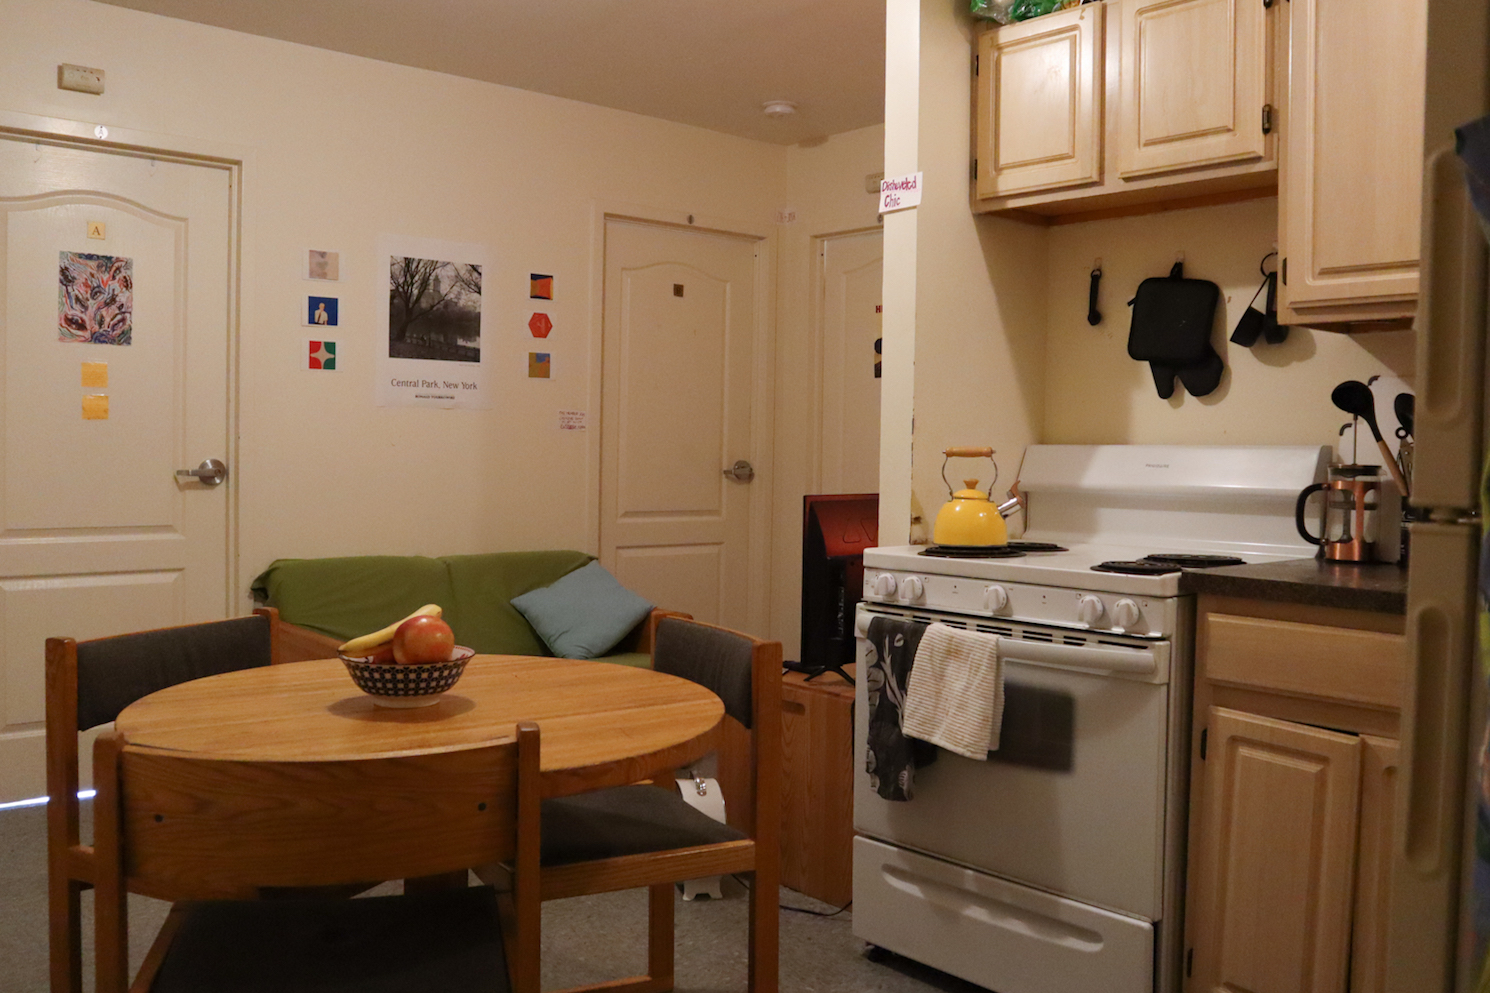 A dorm kitchen with a wooden dining table and stove top. A fruit basket is on the table and a yellow kettle is on the stove.